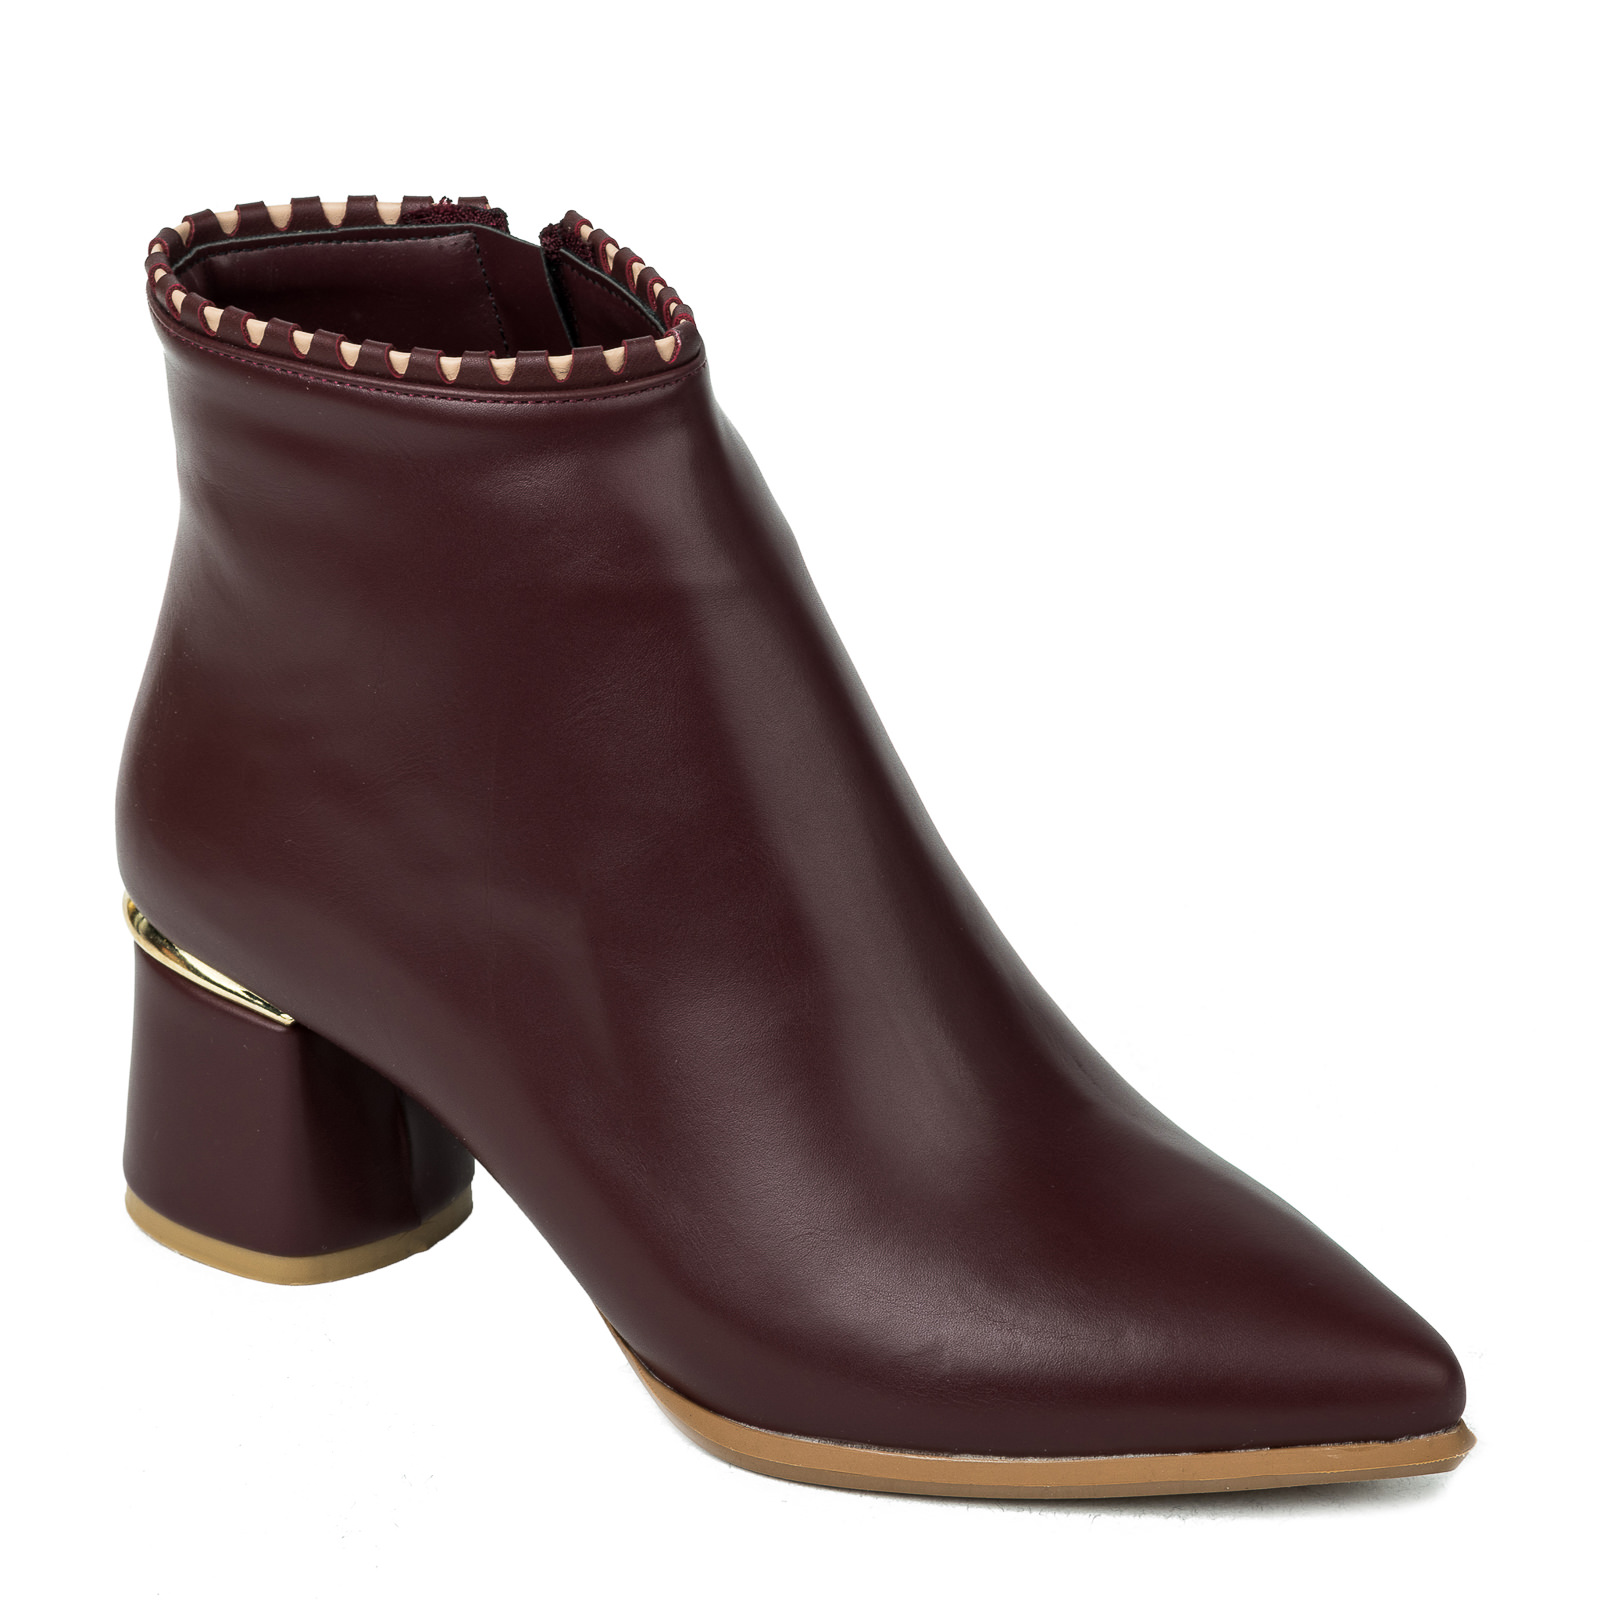 Women ankle boots B229 - WINE RED